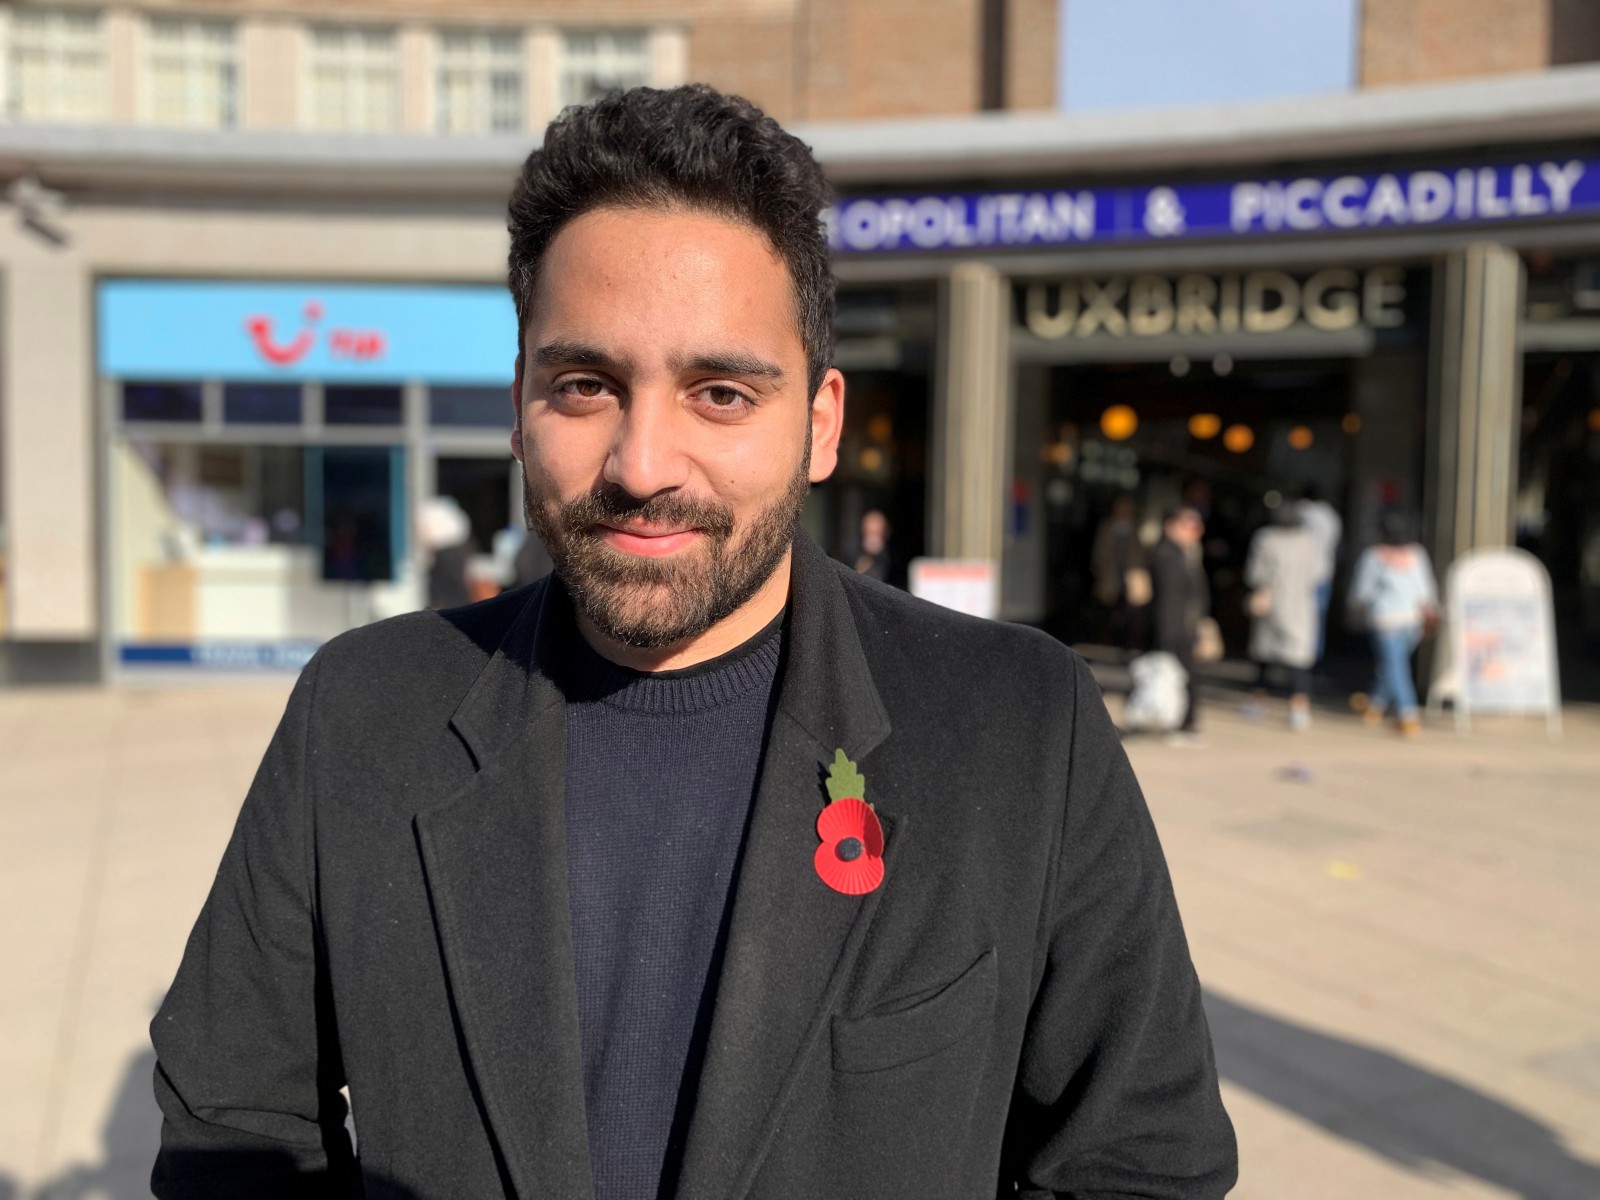 Labour candidate Ali Milani has previously claimed he believed the US government knew about the 9/11 attacks before they happened